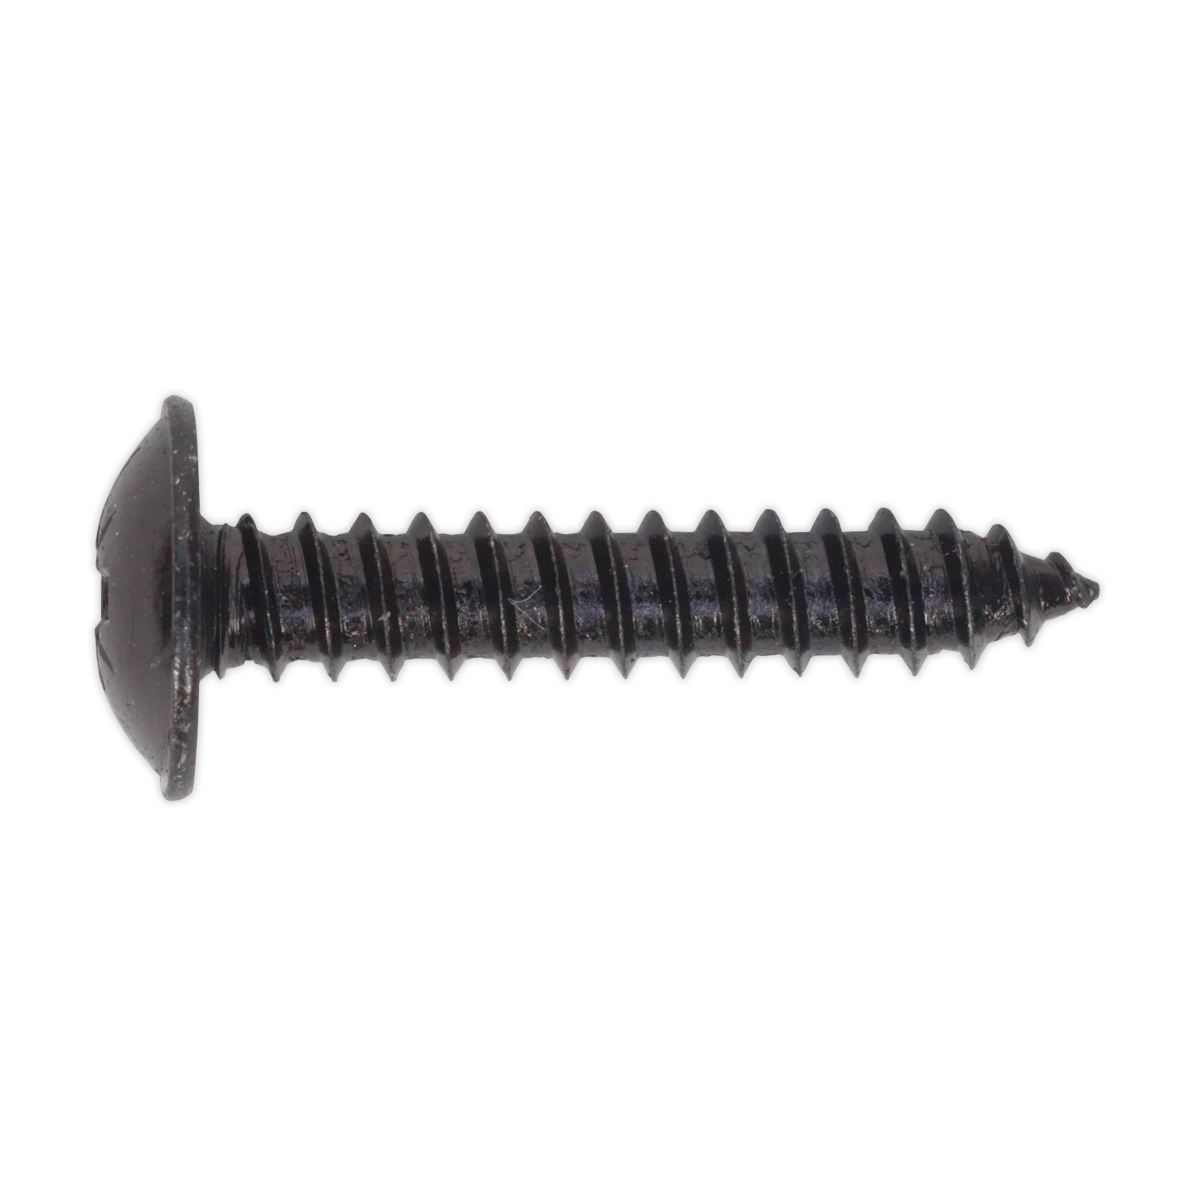 Self-Tapping Screw 4.8 x 25mm Flanged Head Black Pozi Pack of 100 - BST4825 - Farming Parts